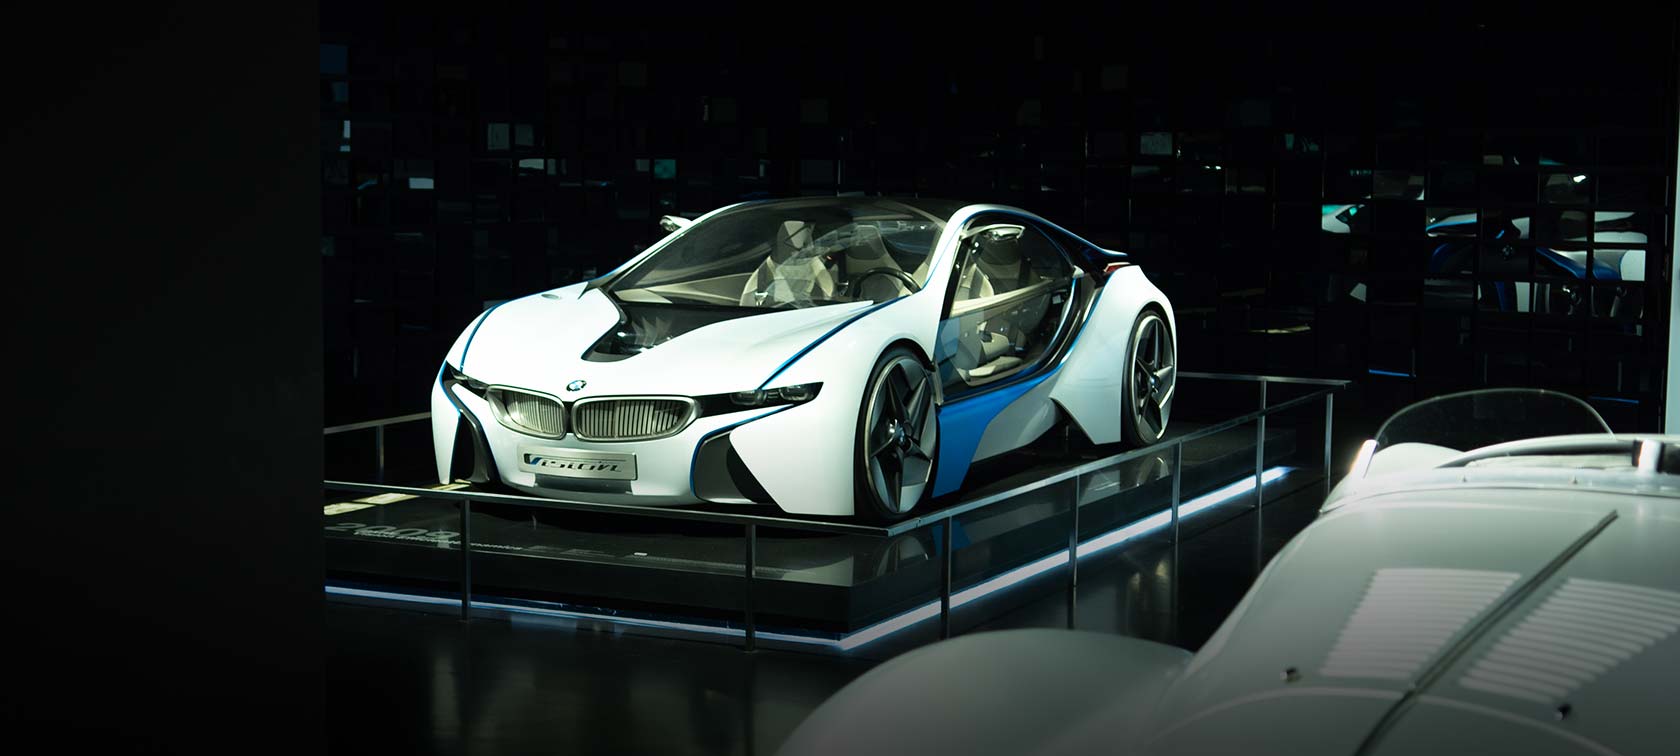 Insight into the House of Design in the BMW Museum 